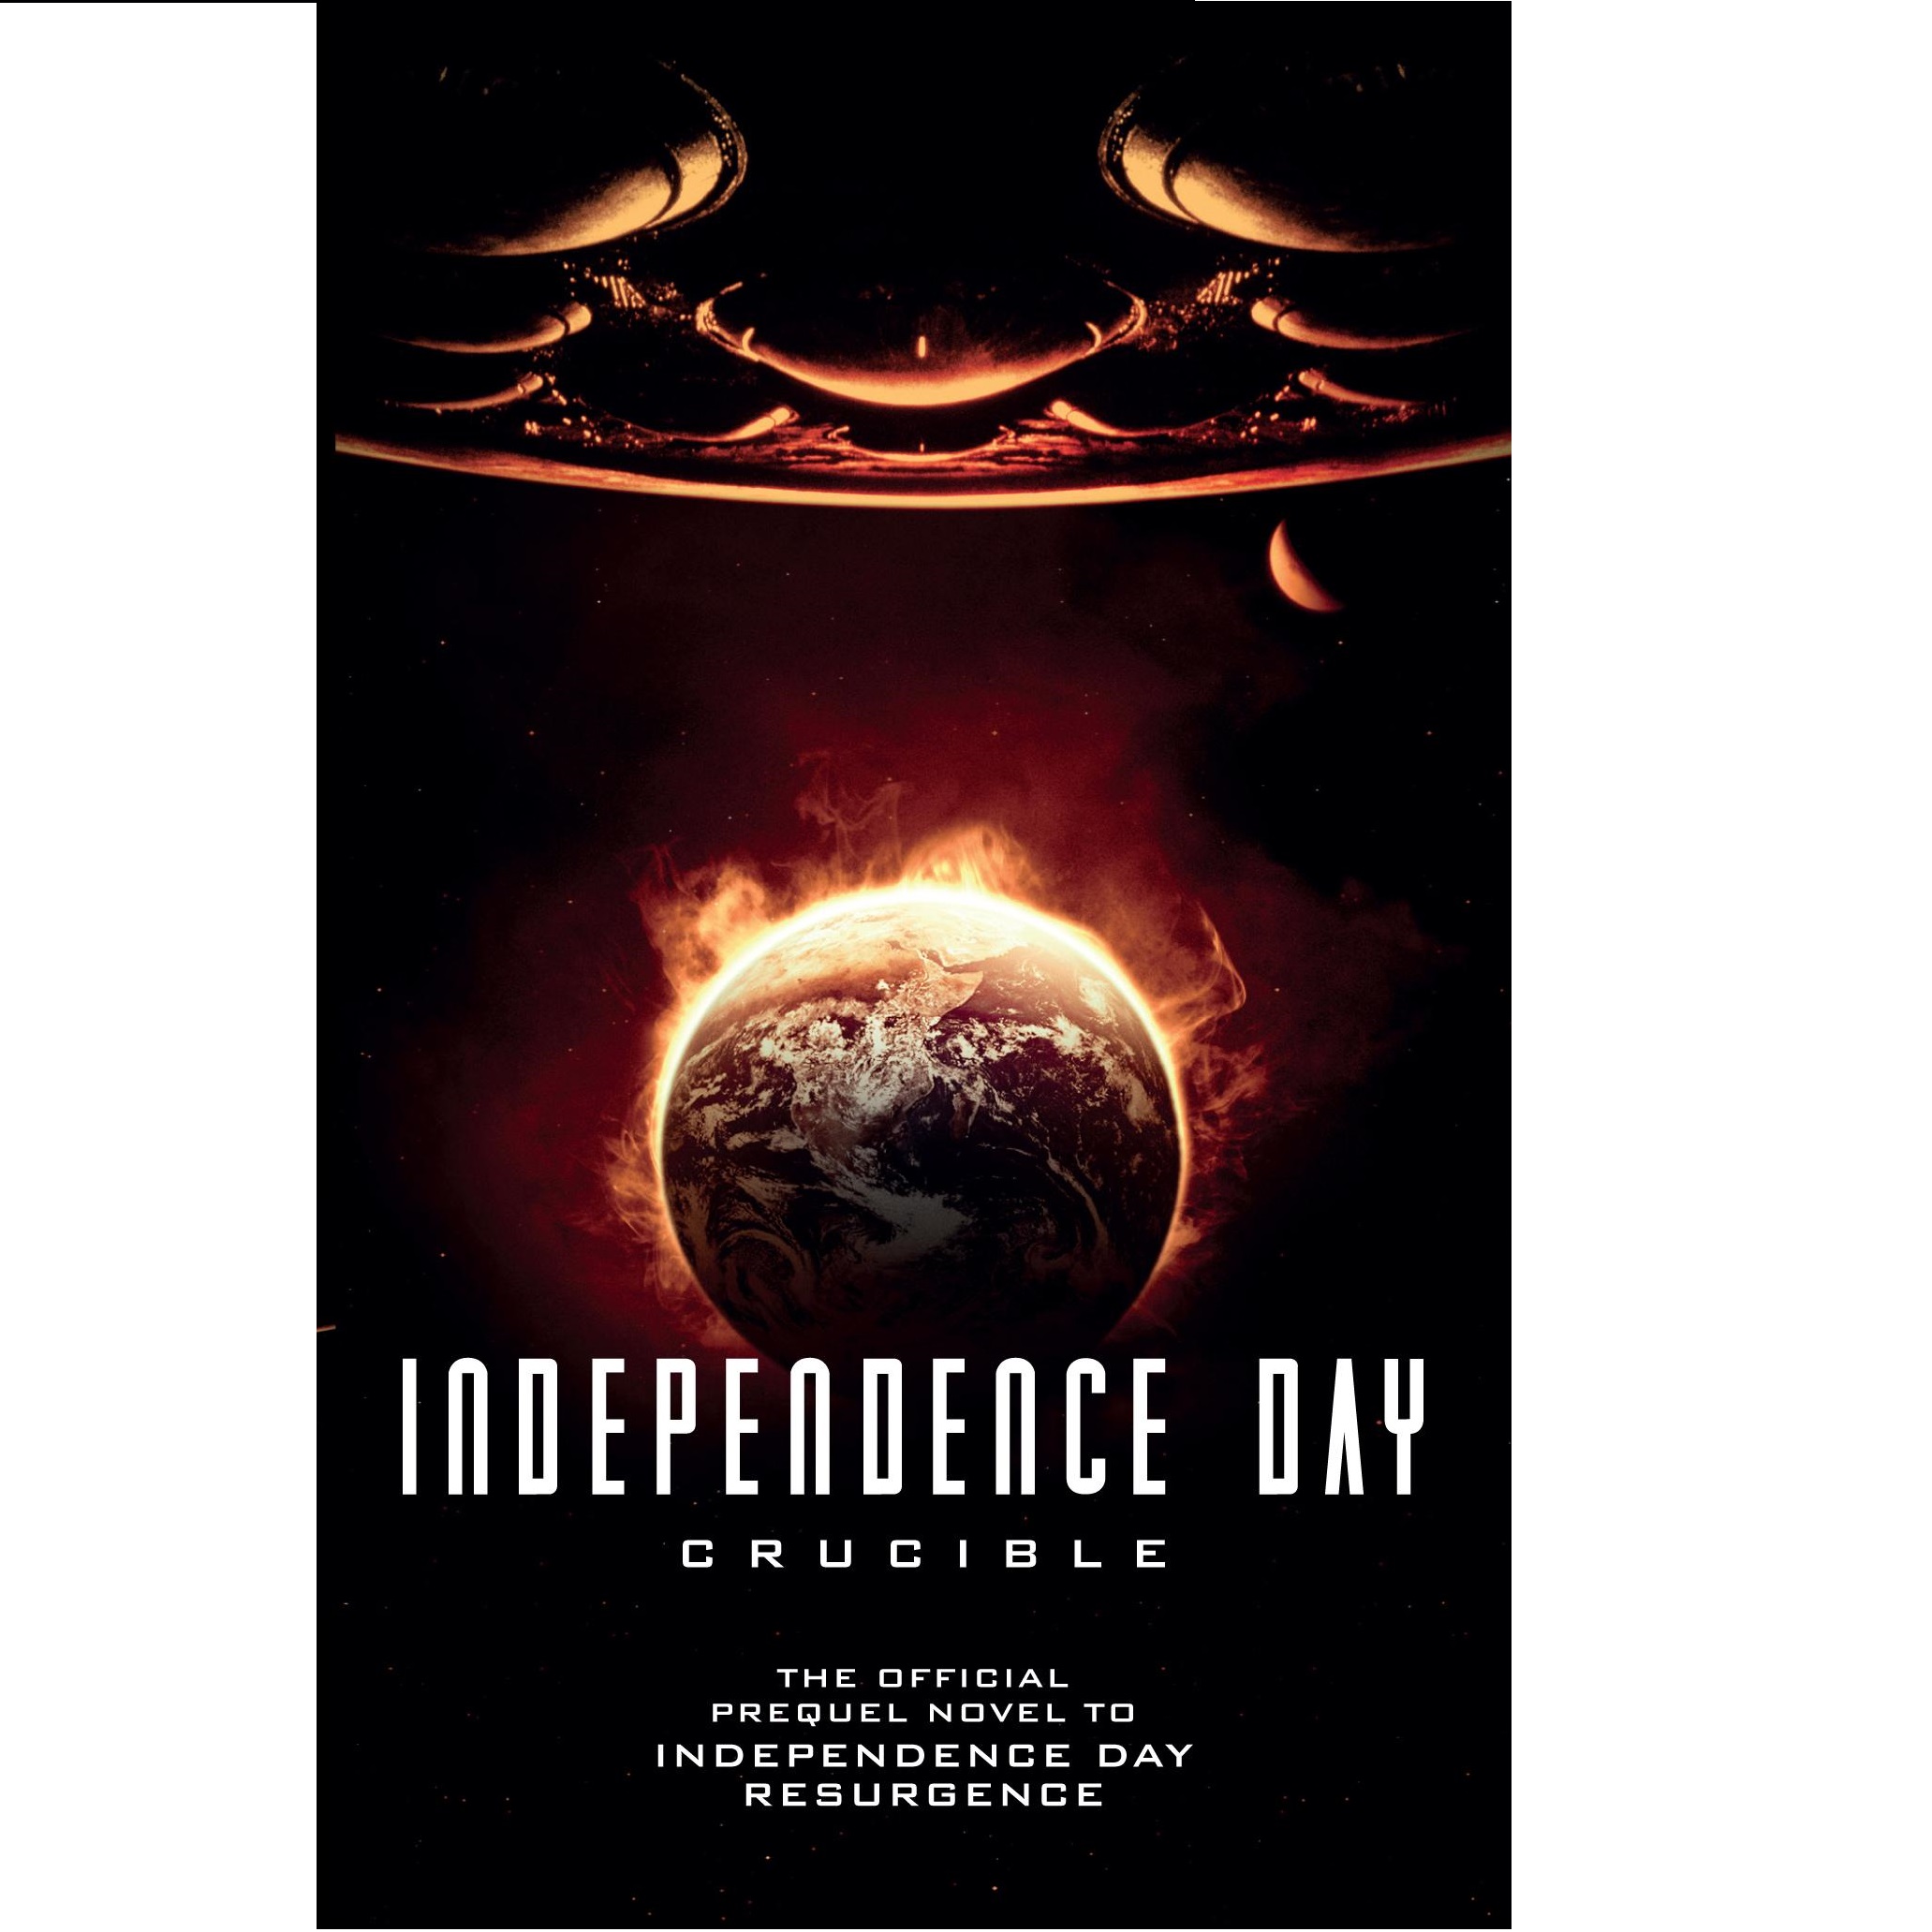 Independence Day: Crucible by Greg Keyes